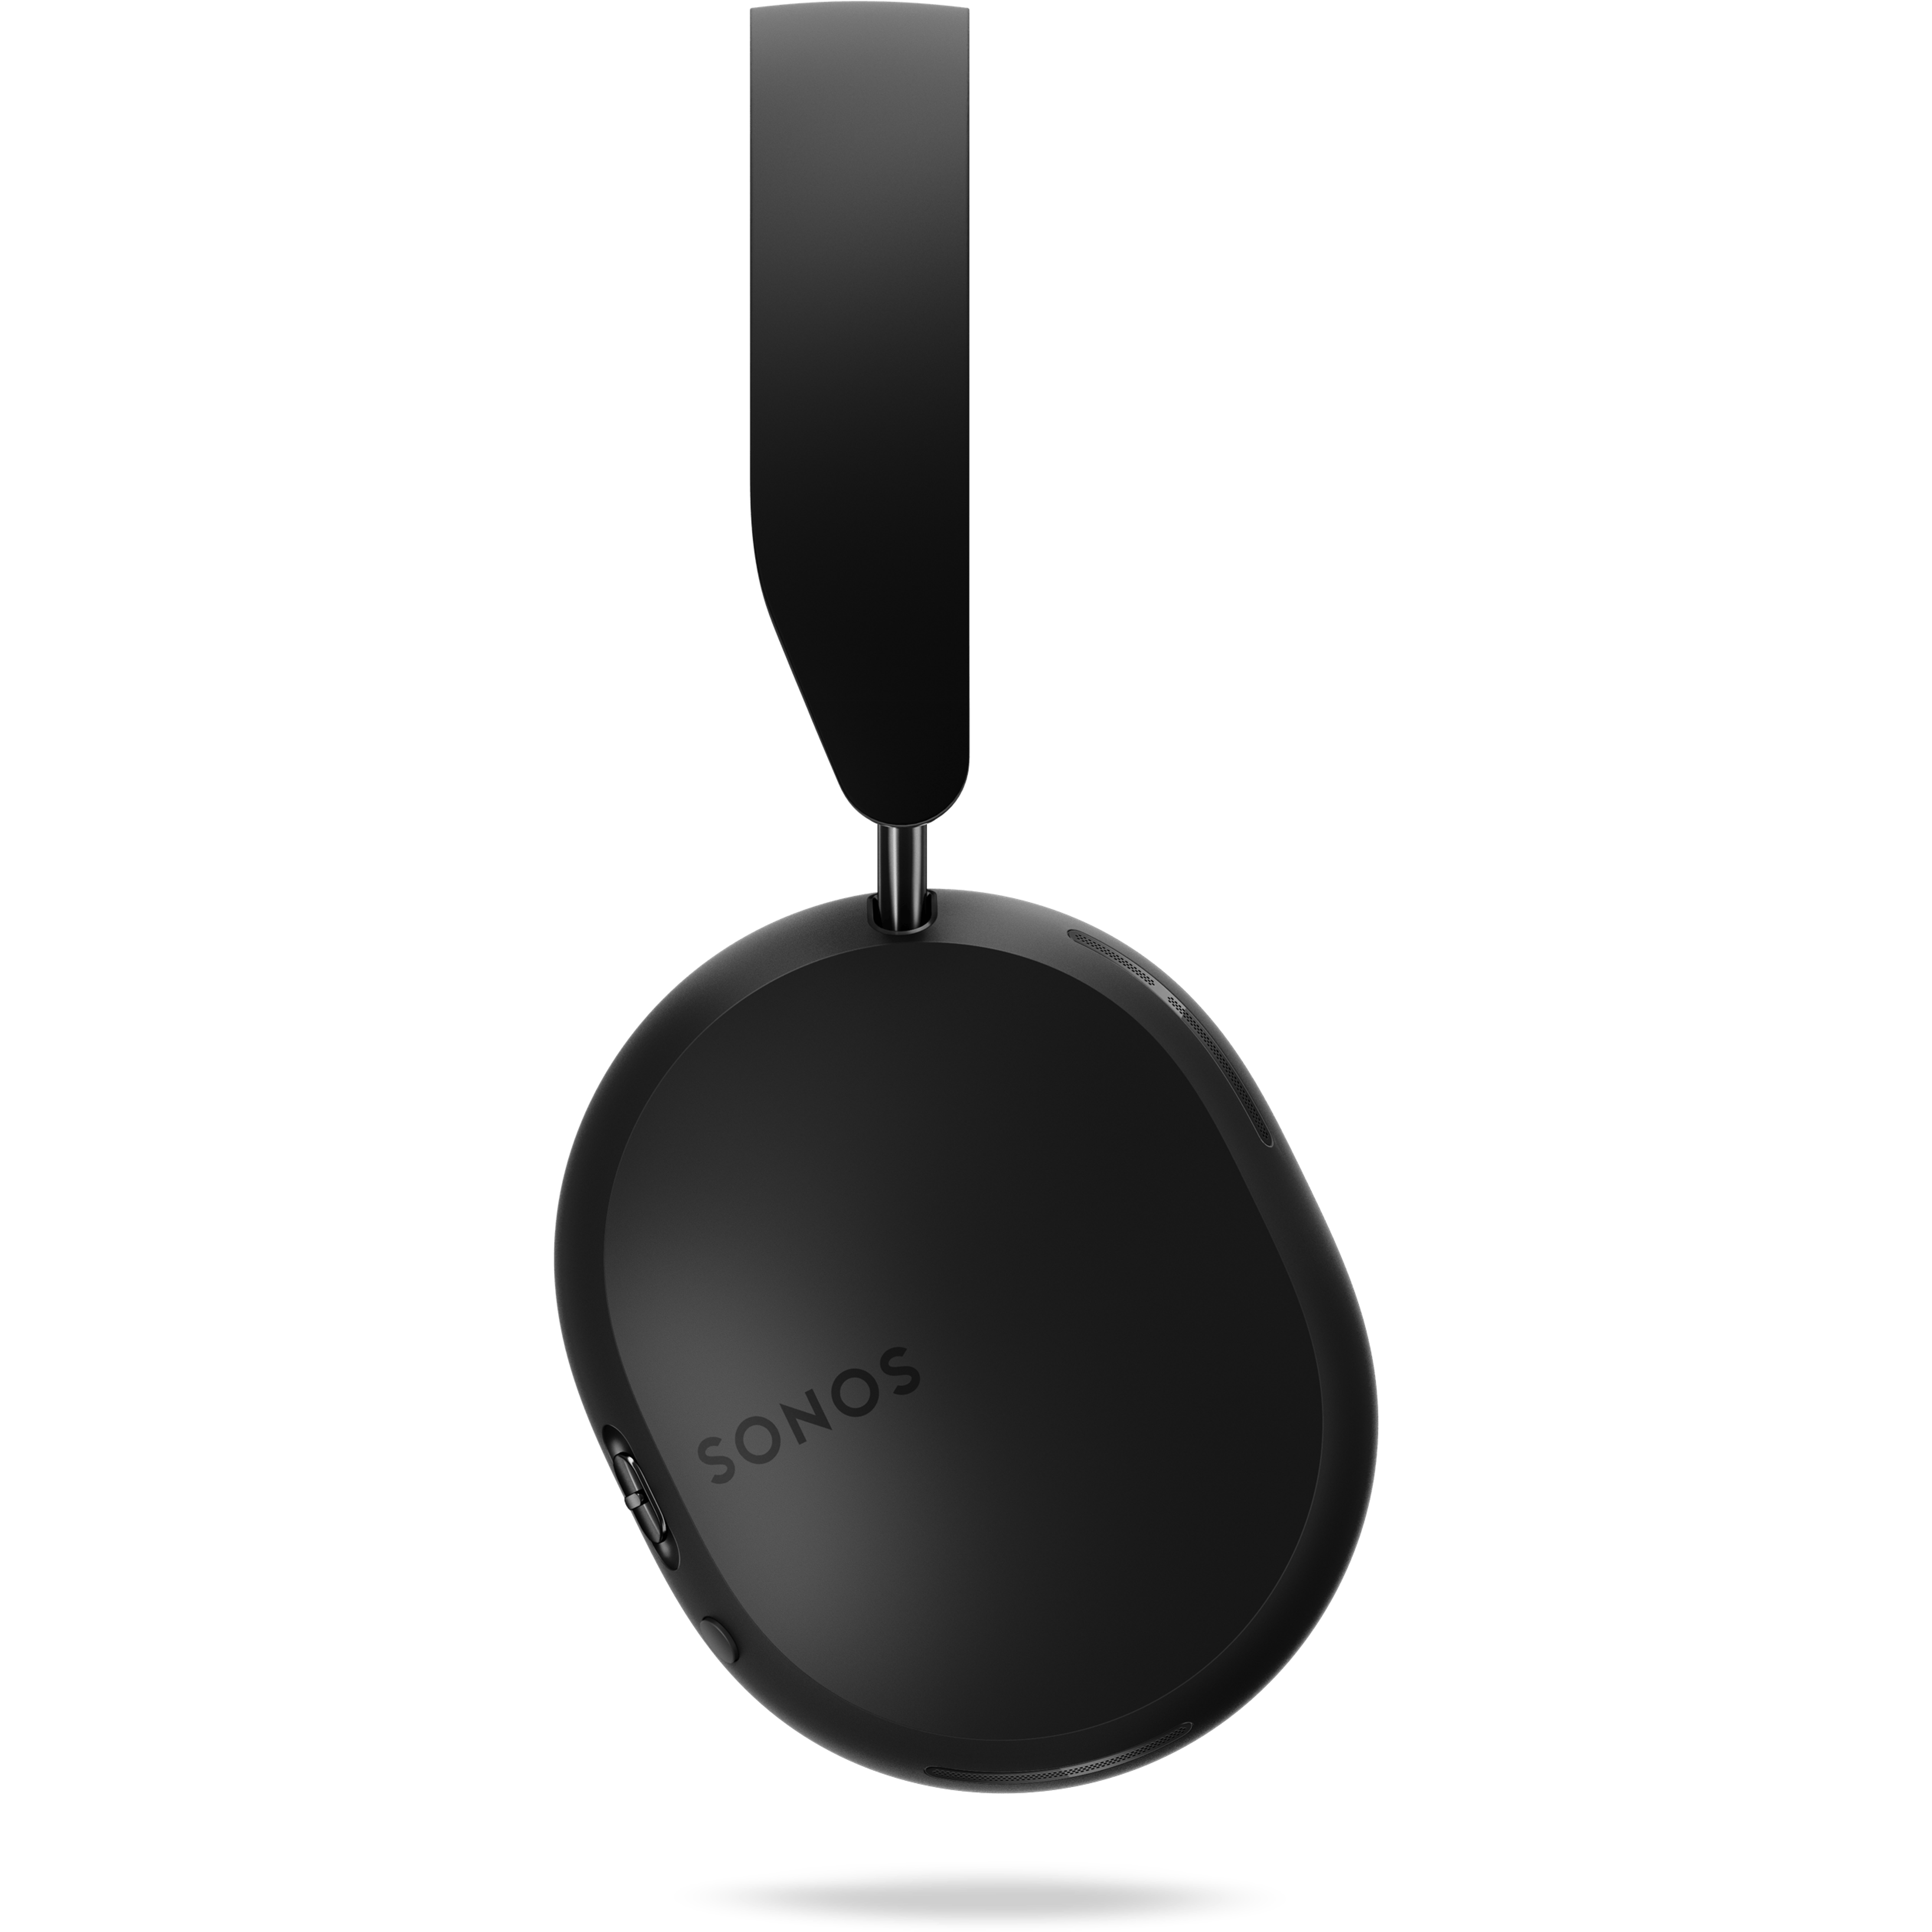 A black pair of Sonos Ace headphones from the right side profile